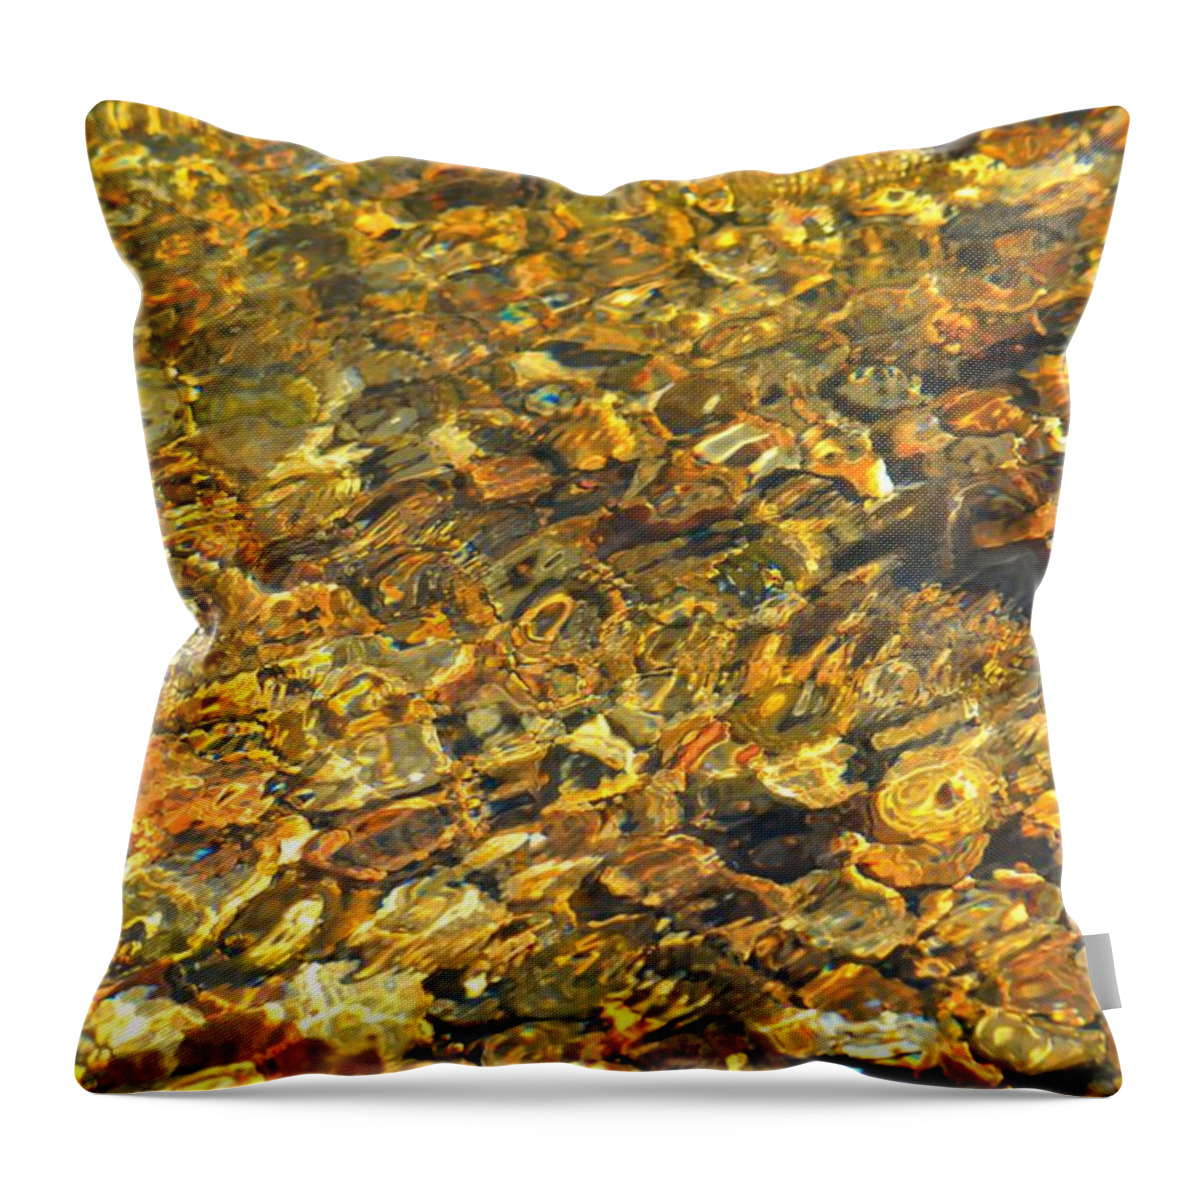 Abstract Throw Pillow featuring the photograph All That Glitters by Deena Stoddard